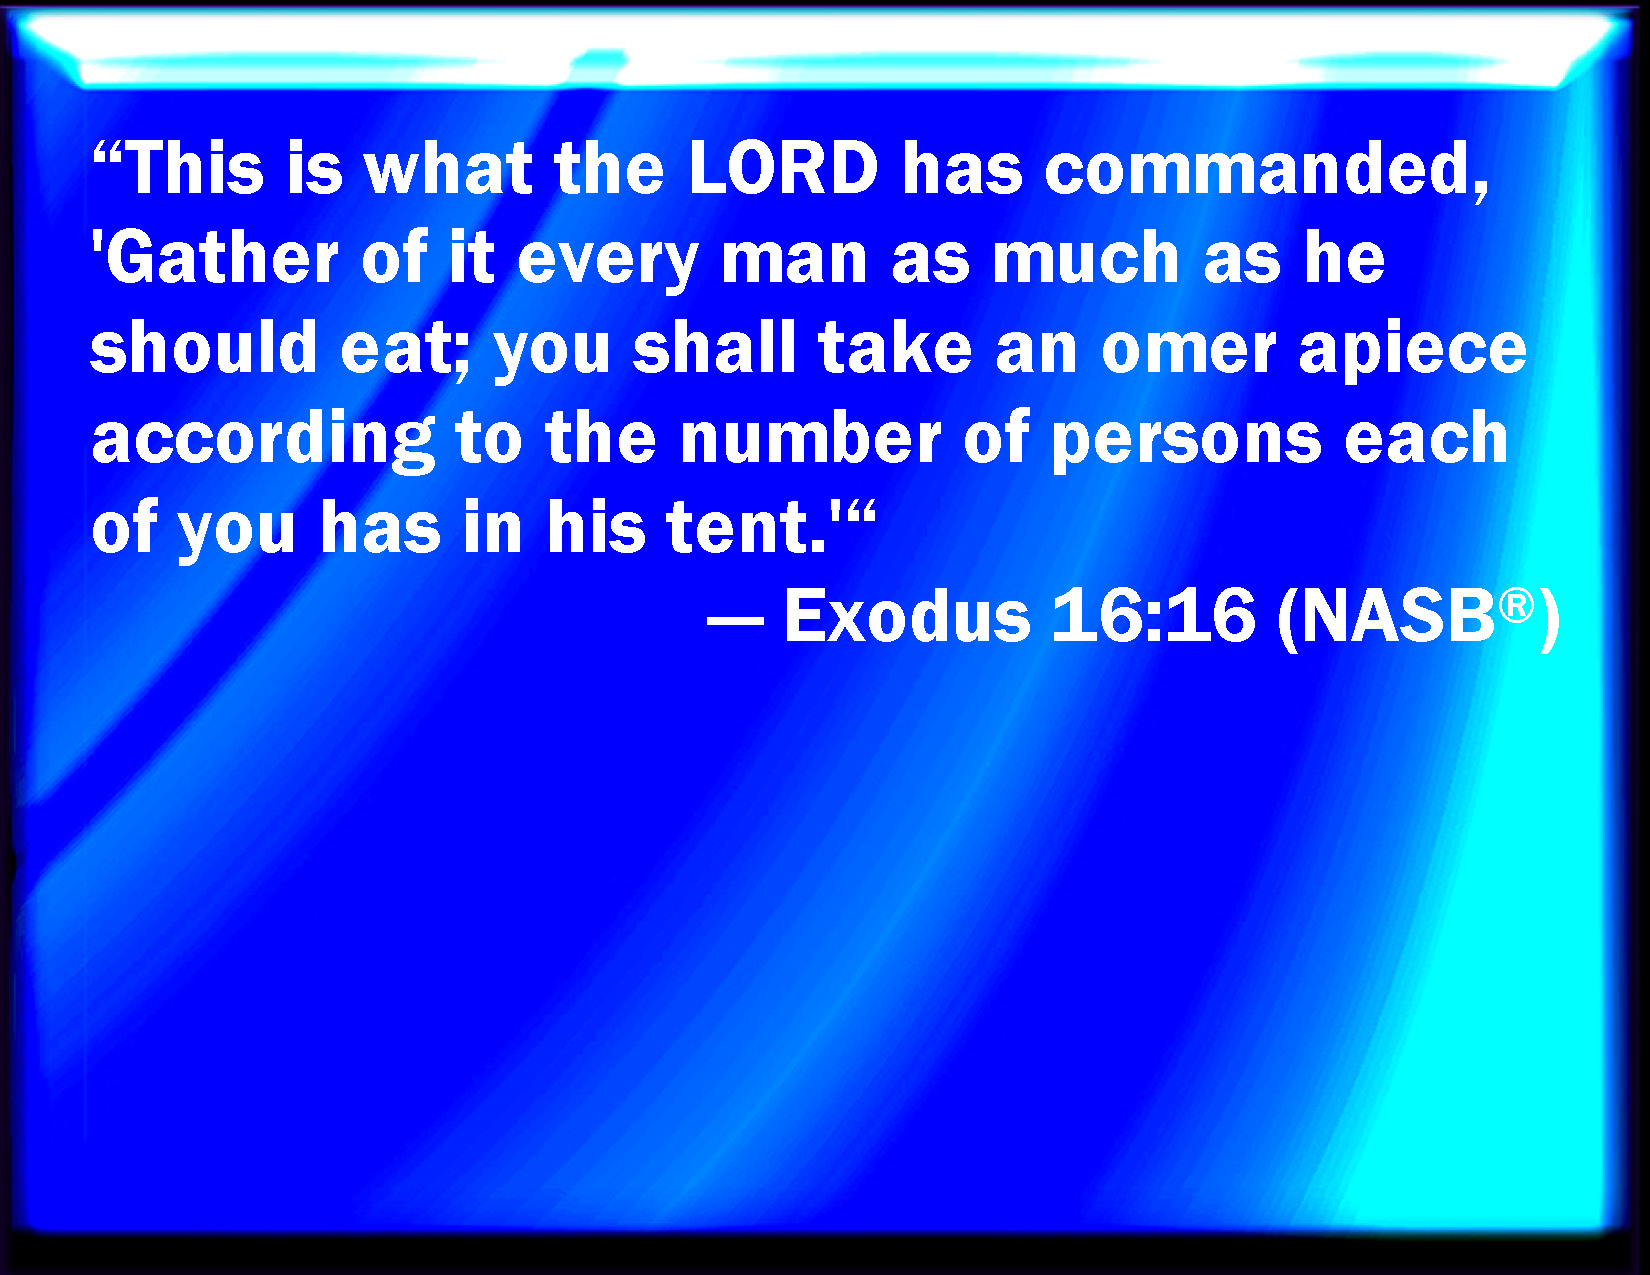 Exodus 16:16 This is the thing which the LORD has commanded, Gather of